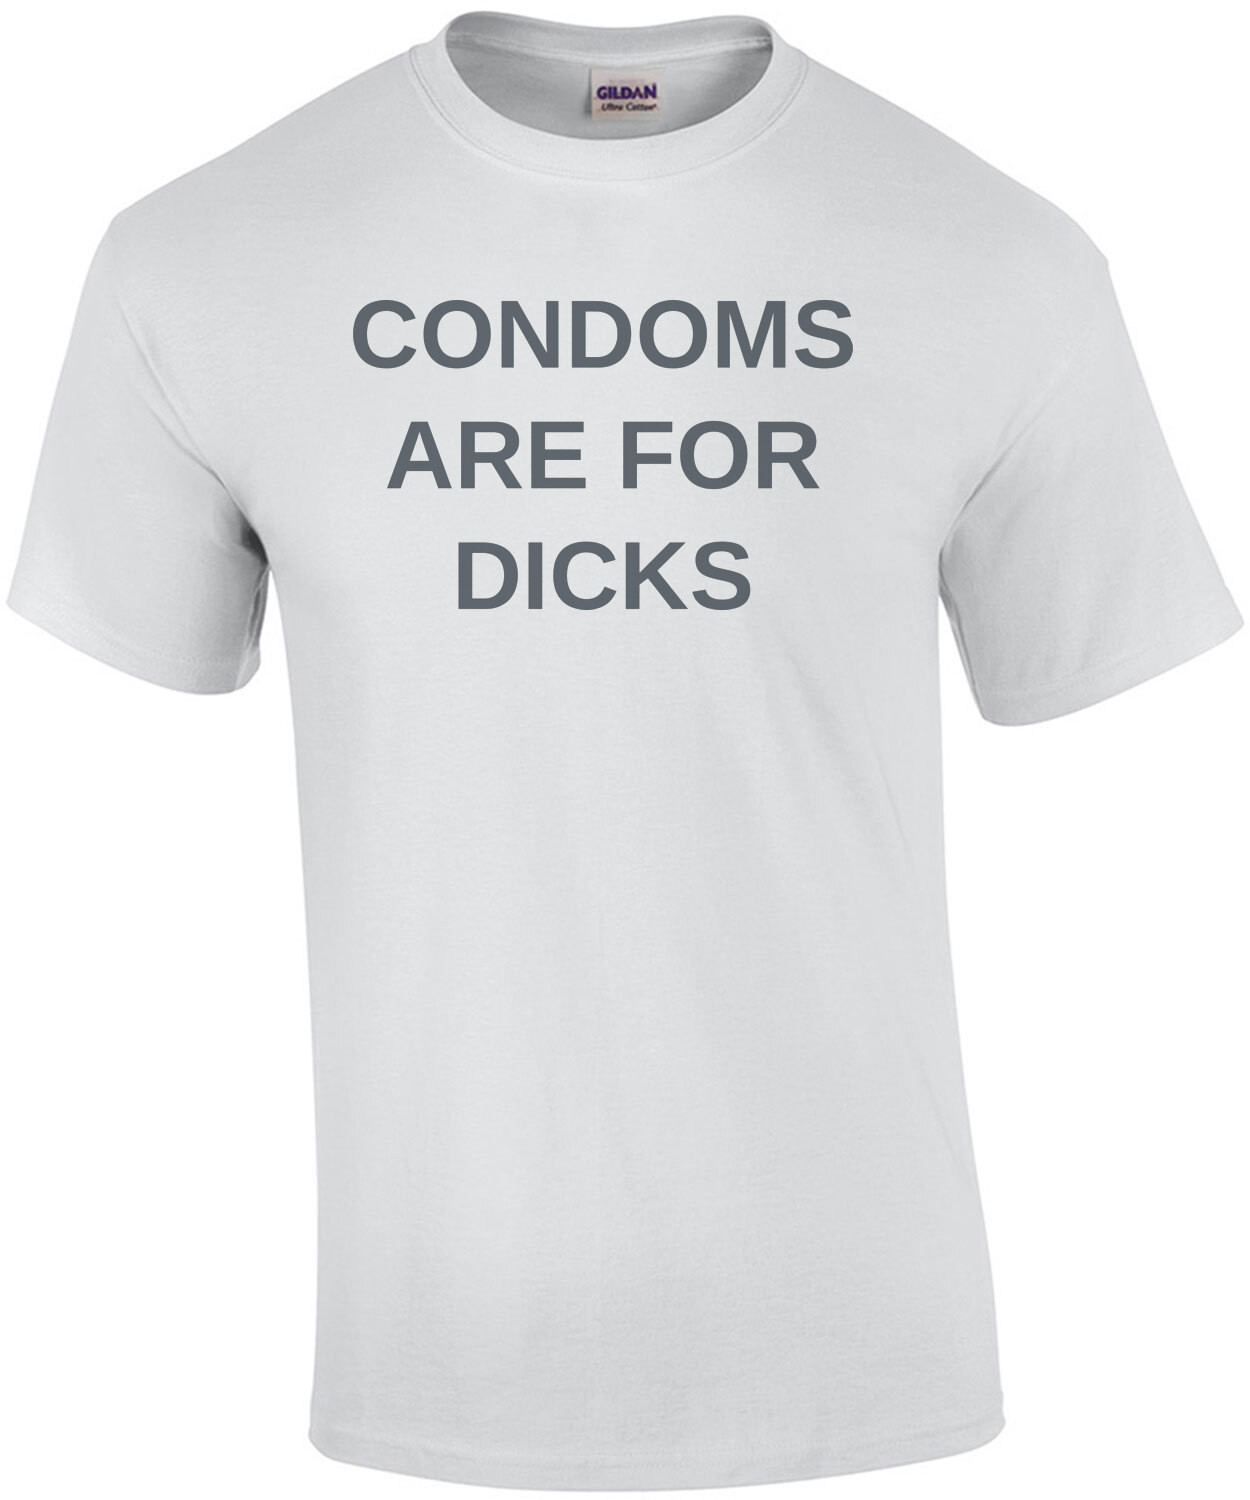 Condoms are for dicks - funny t-shirt